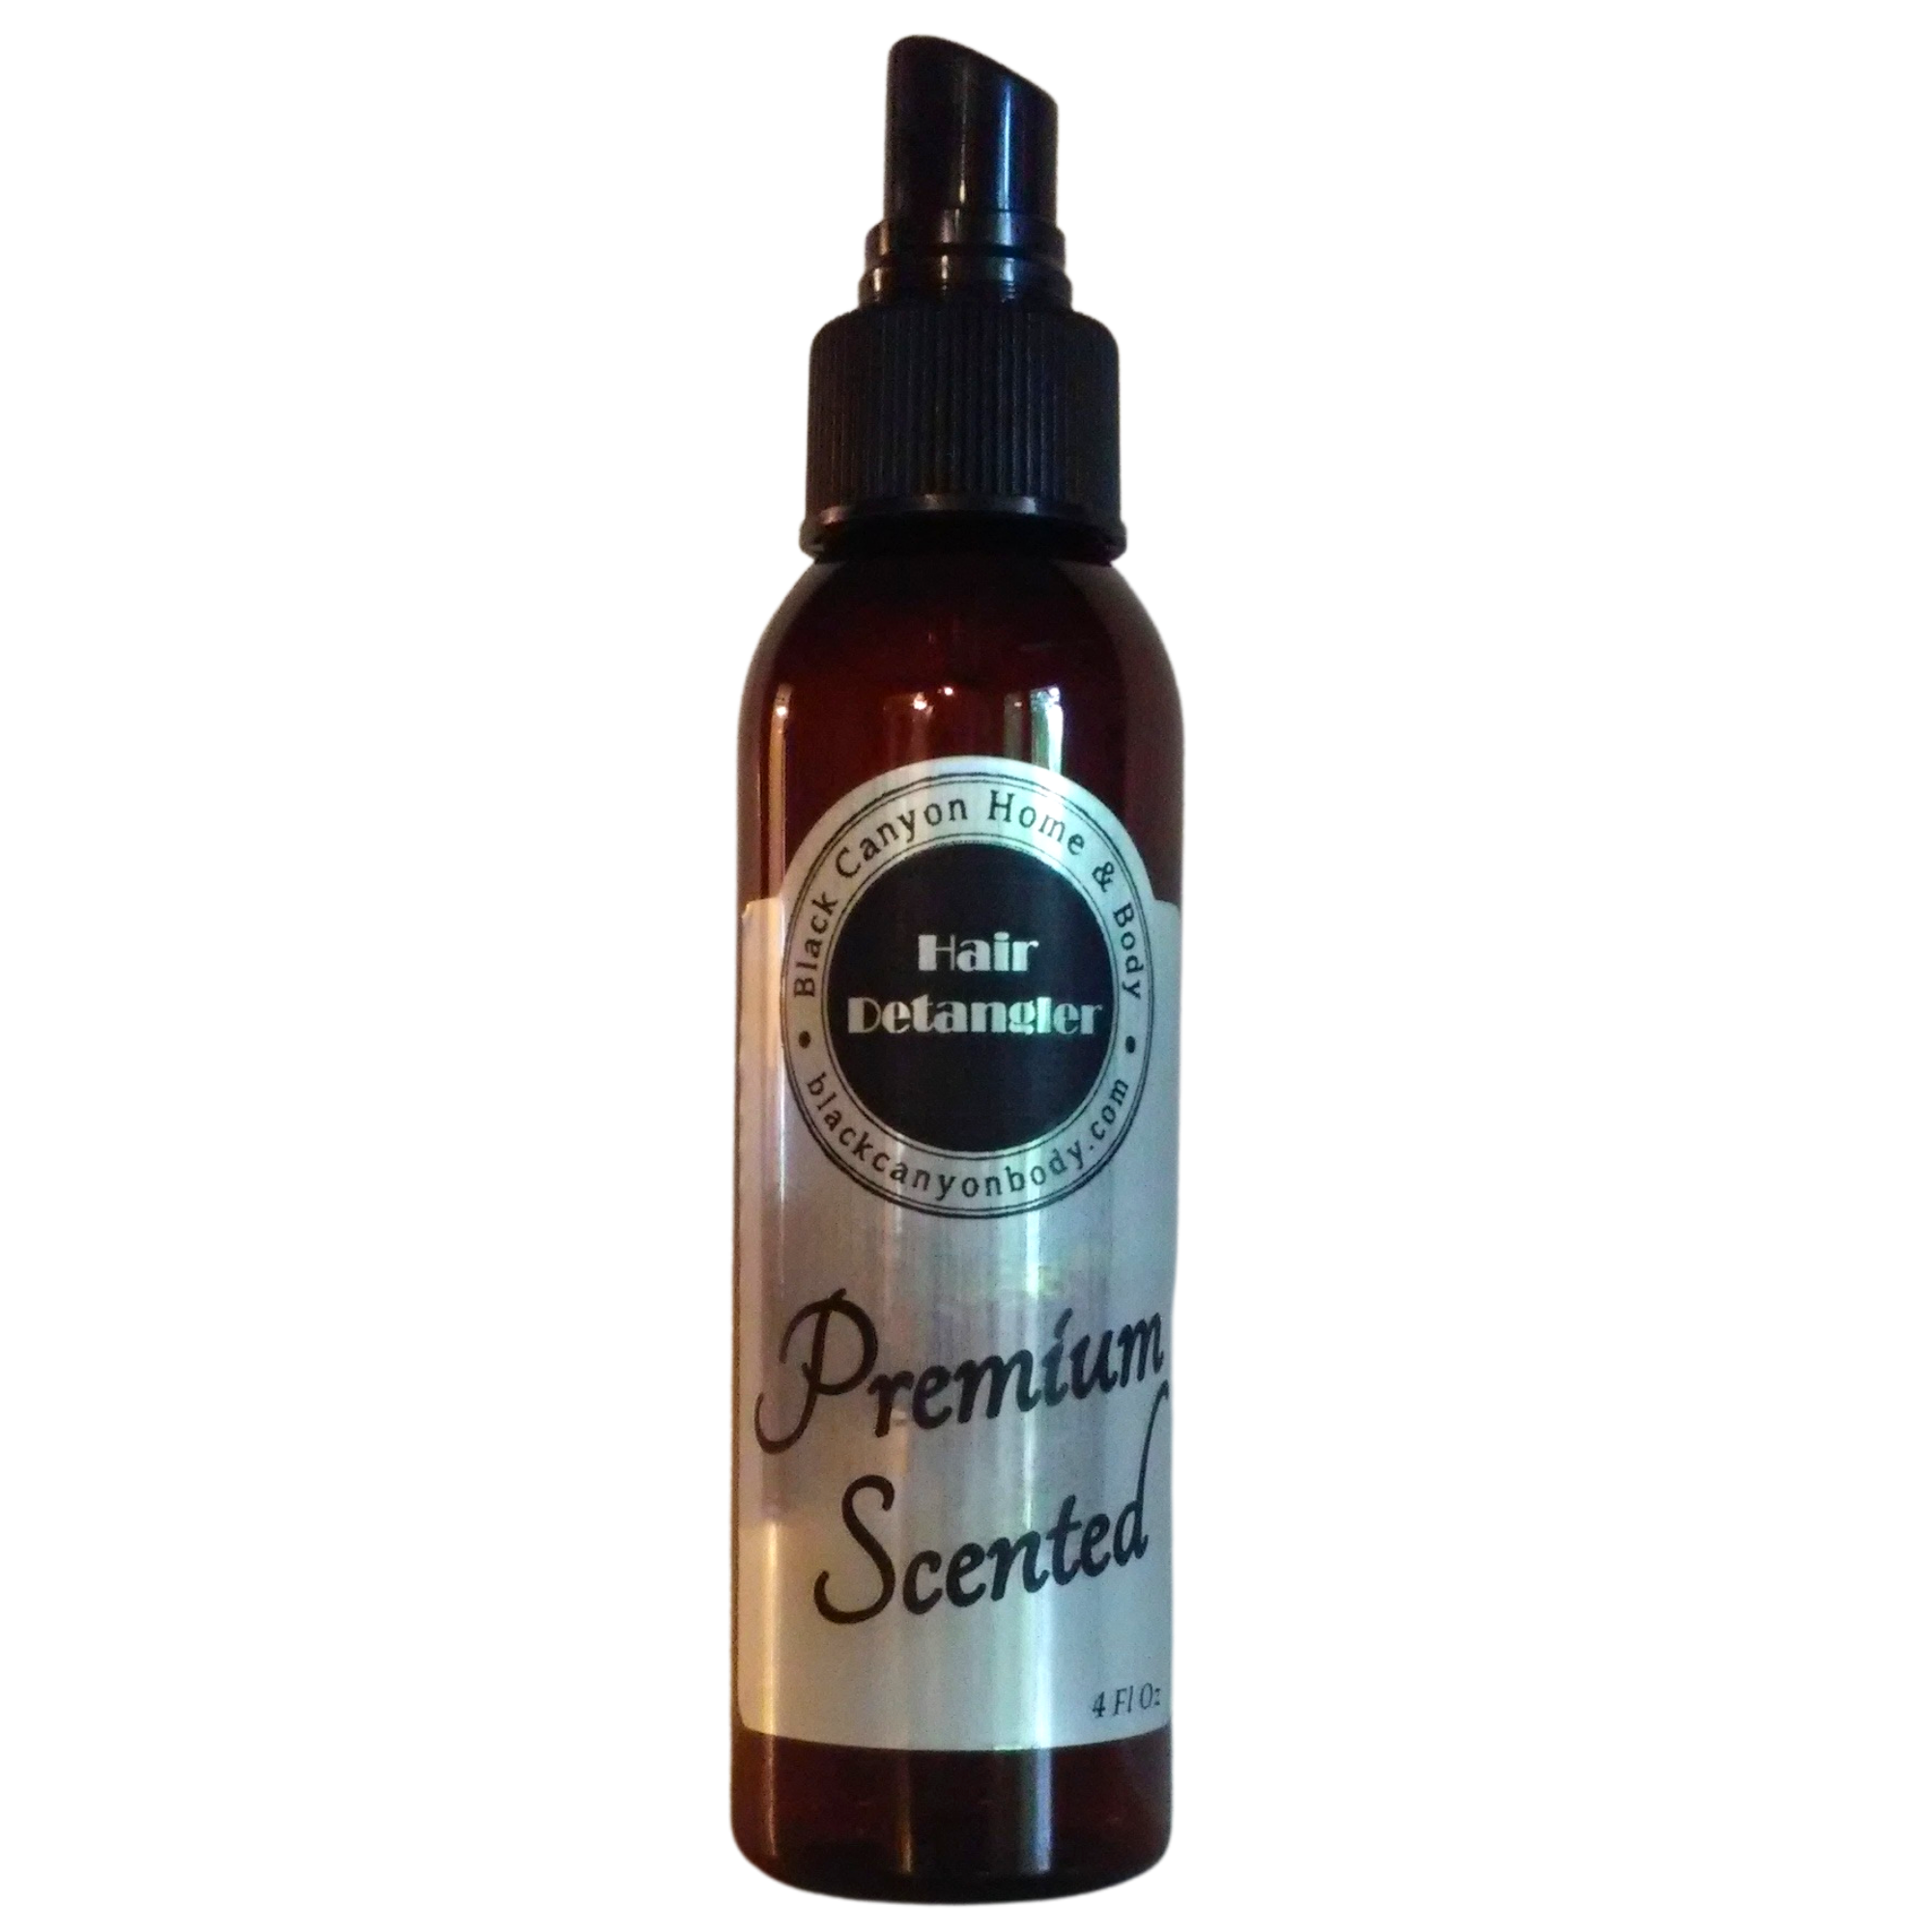 Black Canyon Berry Musk Scented Hair Detangler Spray with Olive Oil